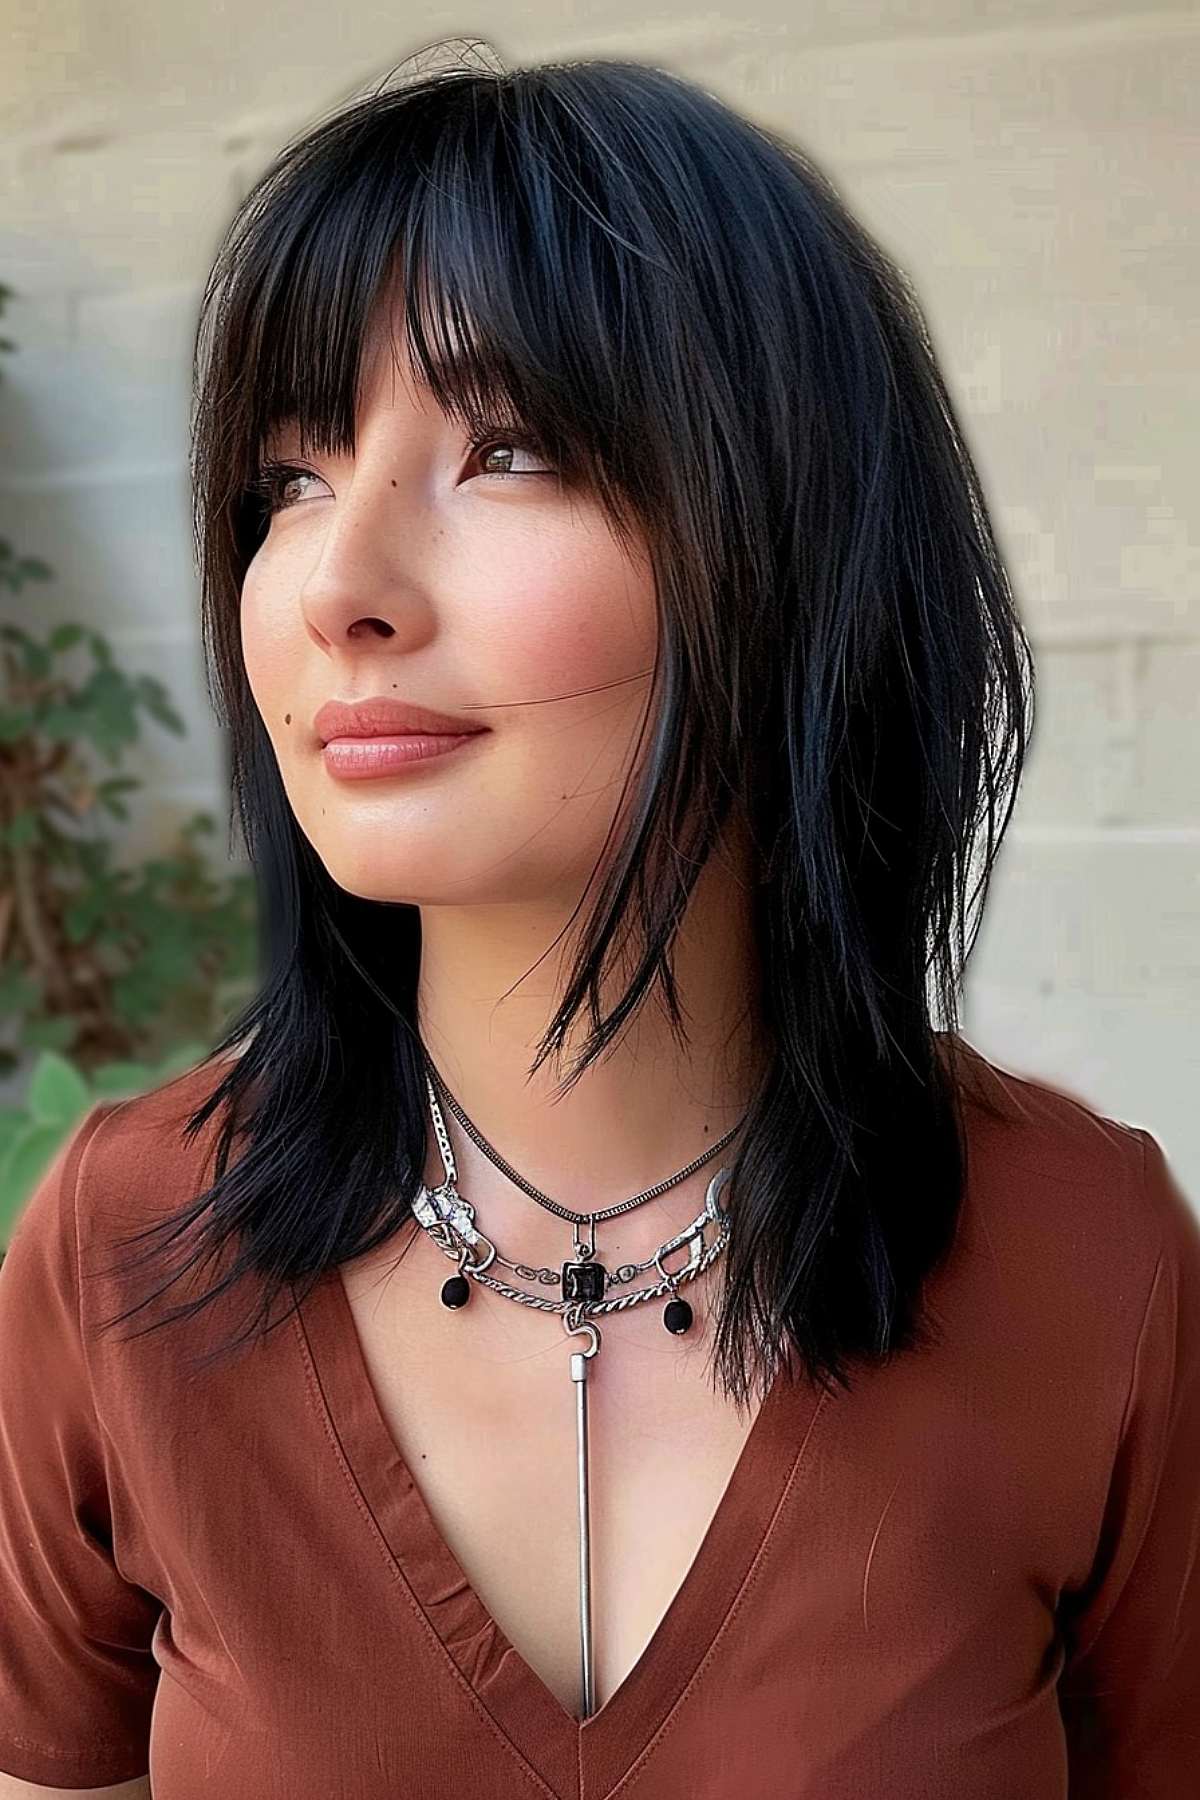 Woman with a Wolf Cut featuring long bangs on straight hair, styled to blend smoothly with layered textures.